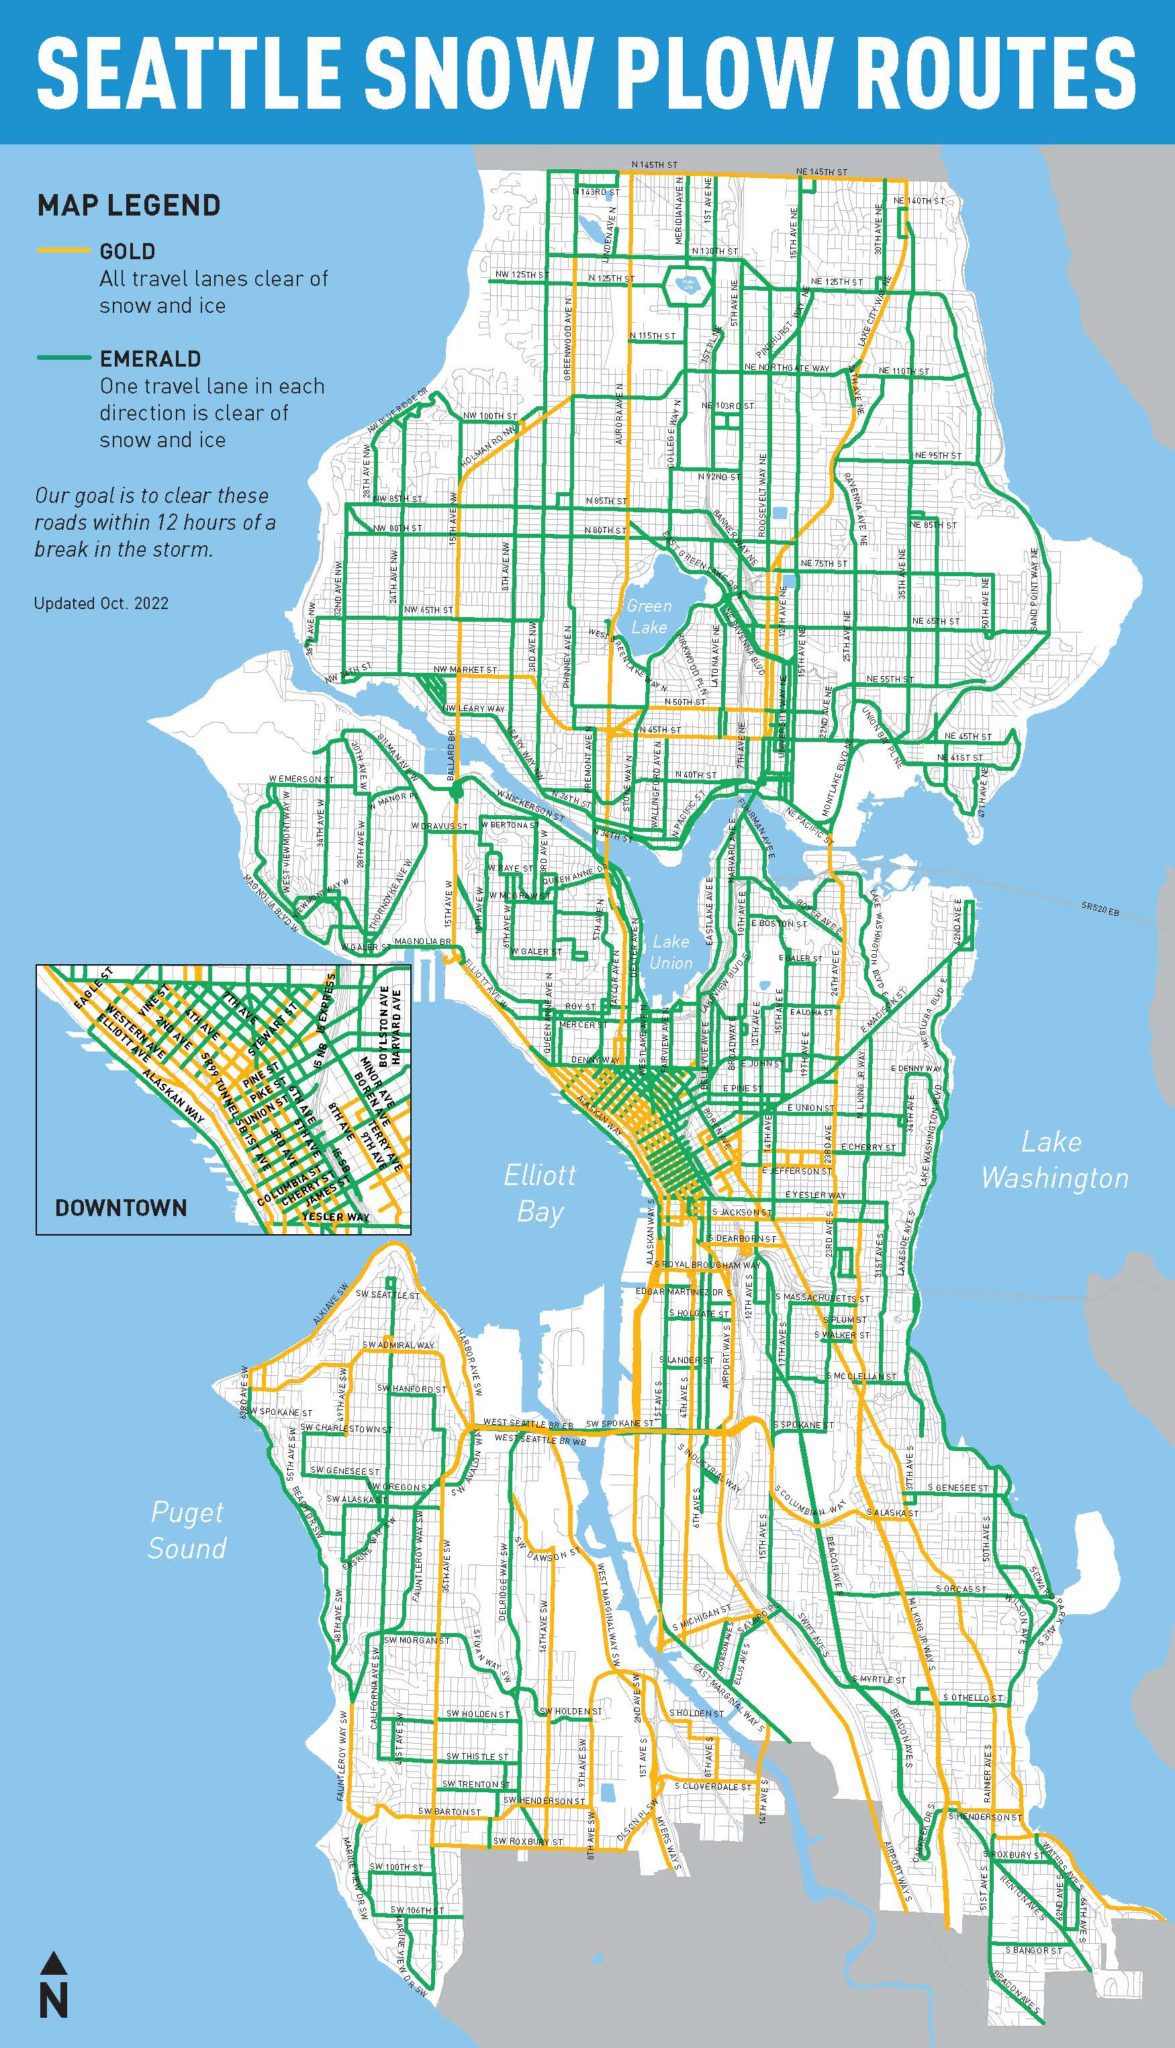 Seattle Snow Plow Routes Map. Gold routes show locations where we aim to clear all travel lanes of snow and ice. Emerald routes show where we aim to clear one travel lane in each direction of snow and ice.